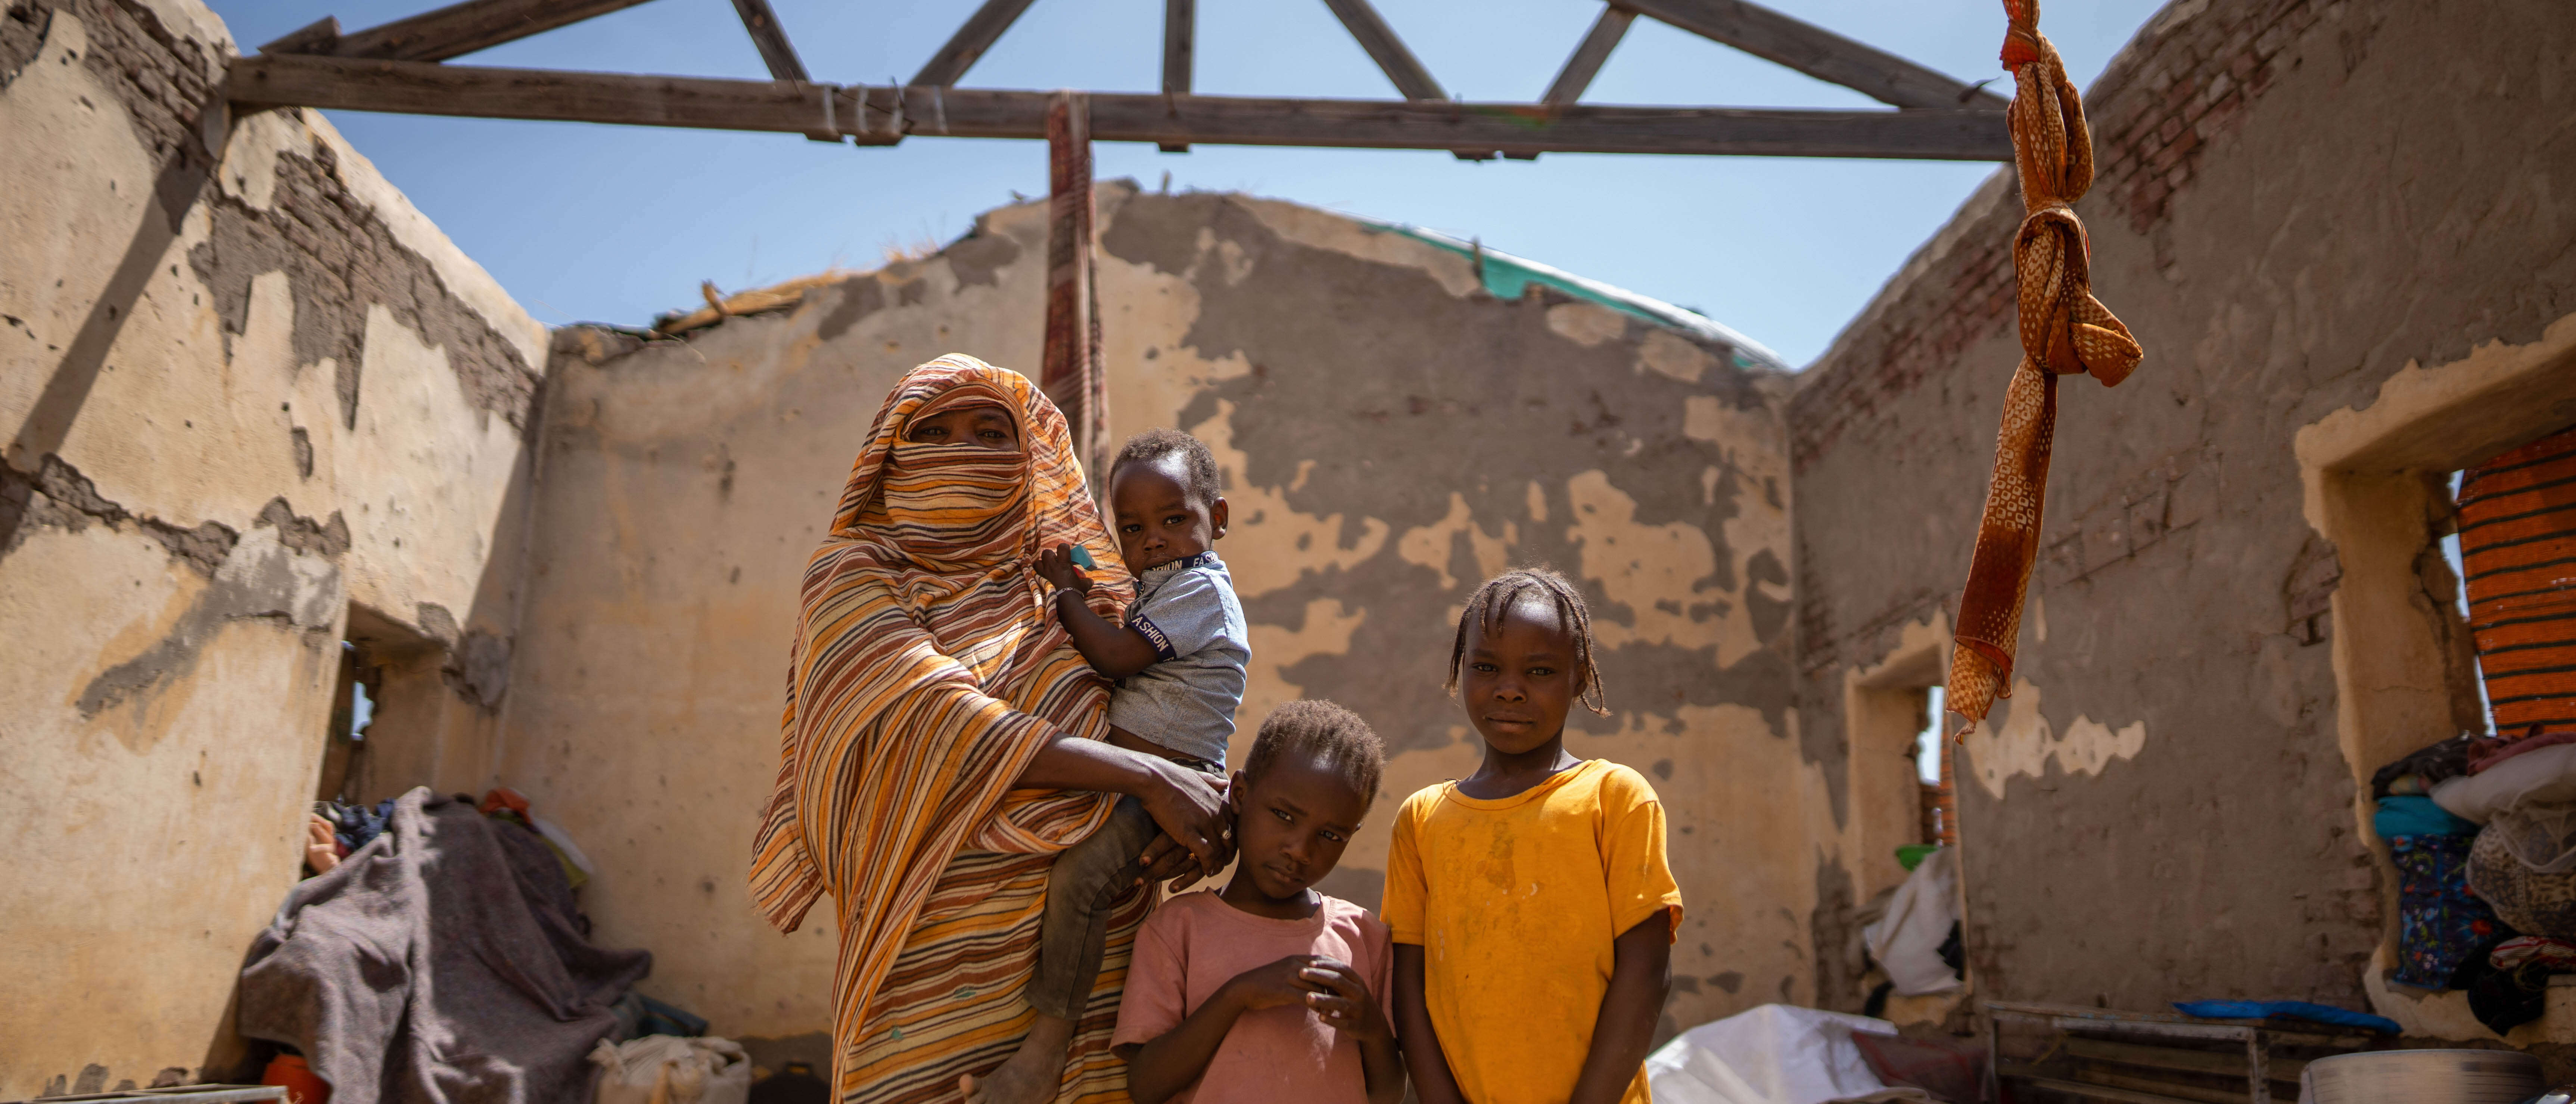 A Sudanese family pose for a photo in the ruins of a building destroyed by conflict.